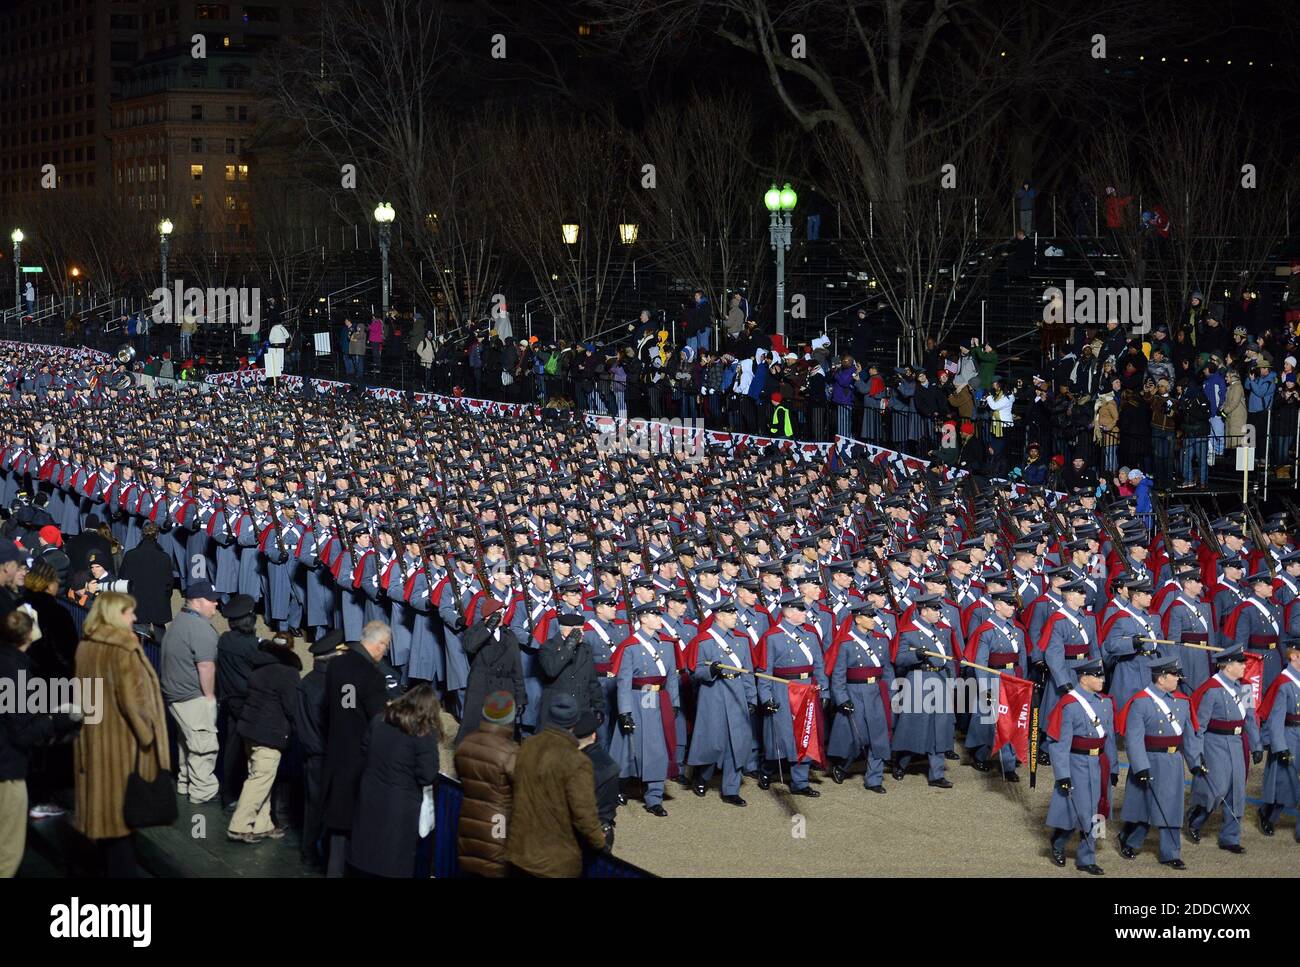 NO FILM, NO VIDEO, NO TV, NO DOCUMENTARY - Cadets from the Virginia Military Institute participate in the Inauguration Parade for the second term of U.S. President Barack Obama in Washington, DC, USA, Monday, January 21, 2013. Photo by Chuck Myers/MCT/ABACAPRESS.COM Stock Photo